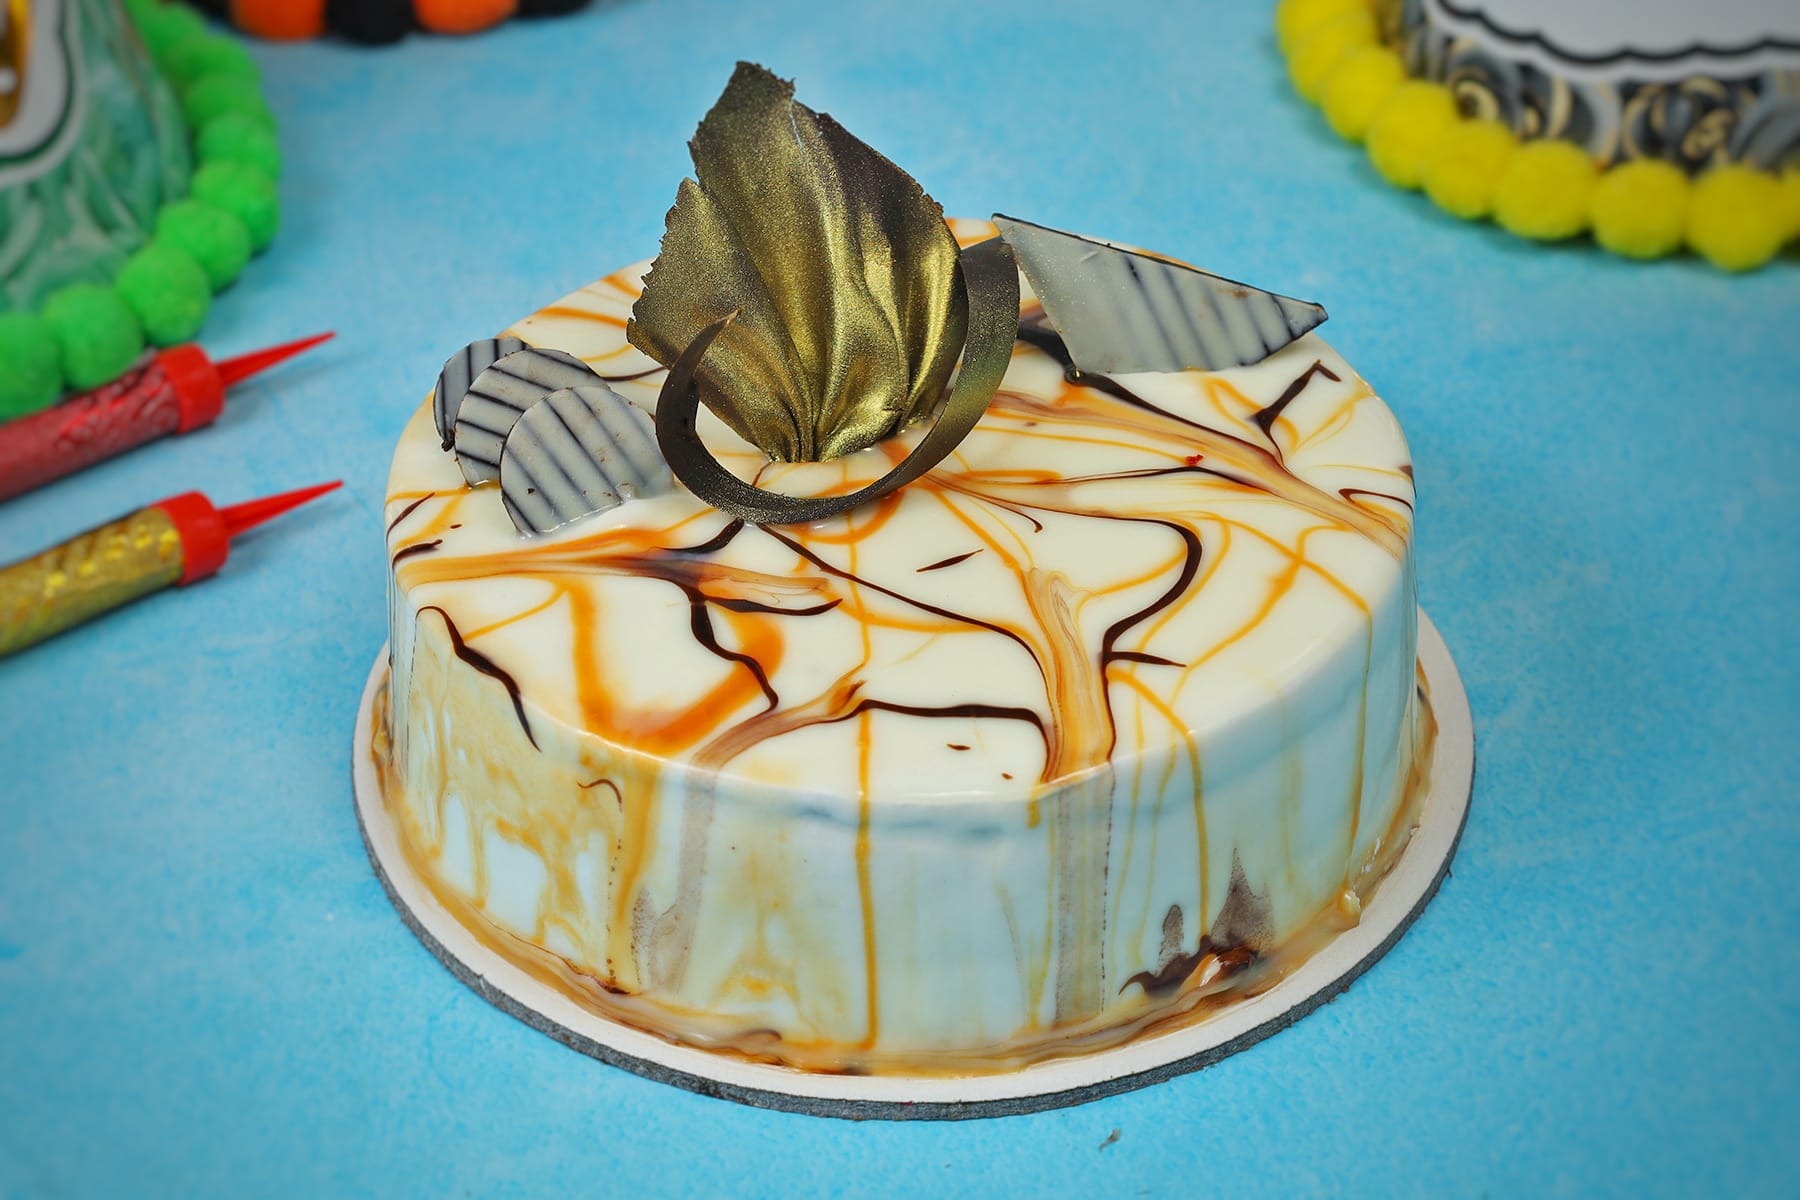 Chocolate/ Cream Cheese Cake - Cakes & Pies - Something Different Cafe &  Catering - American Restaurant in Wilson, NC